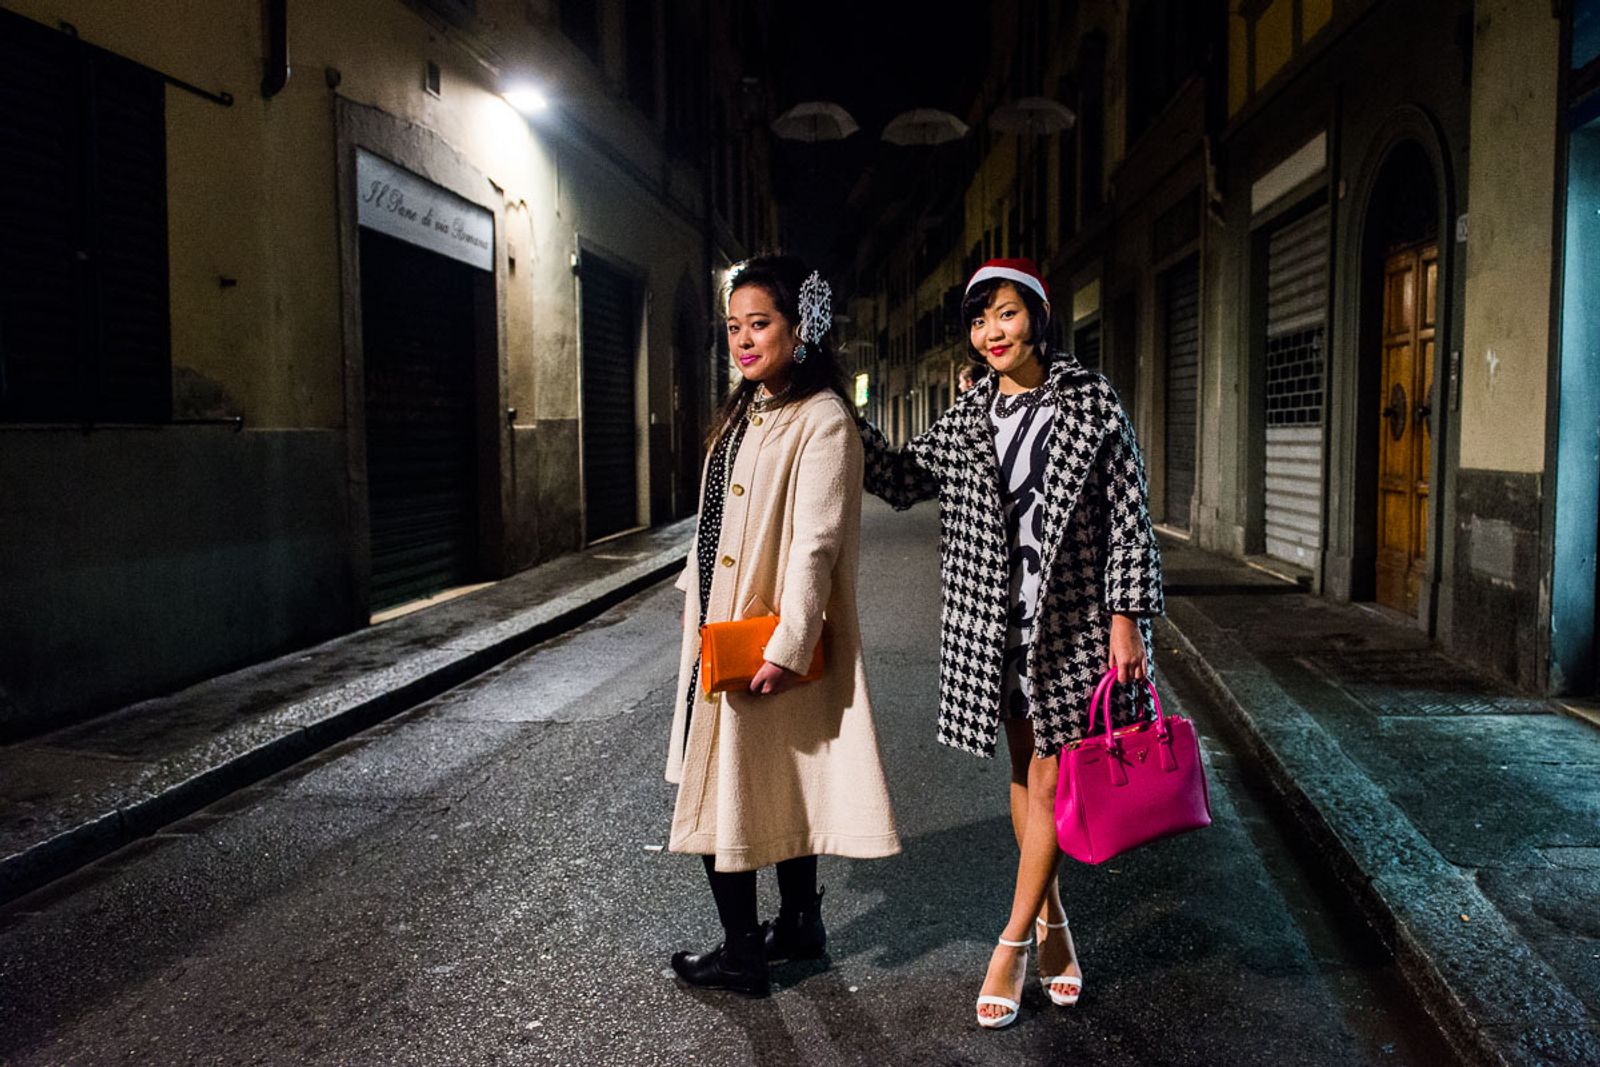 © Agnese Morganti - Florence, Cristina and Jessica, both fashion design students, pose for a photo in the San Frediano neighbourhood of Florence